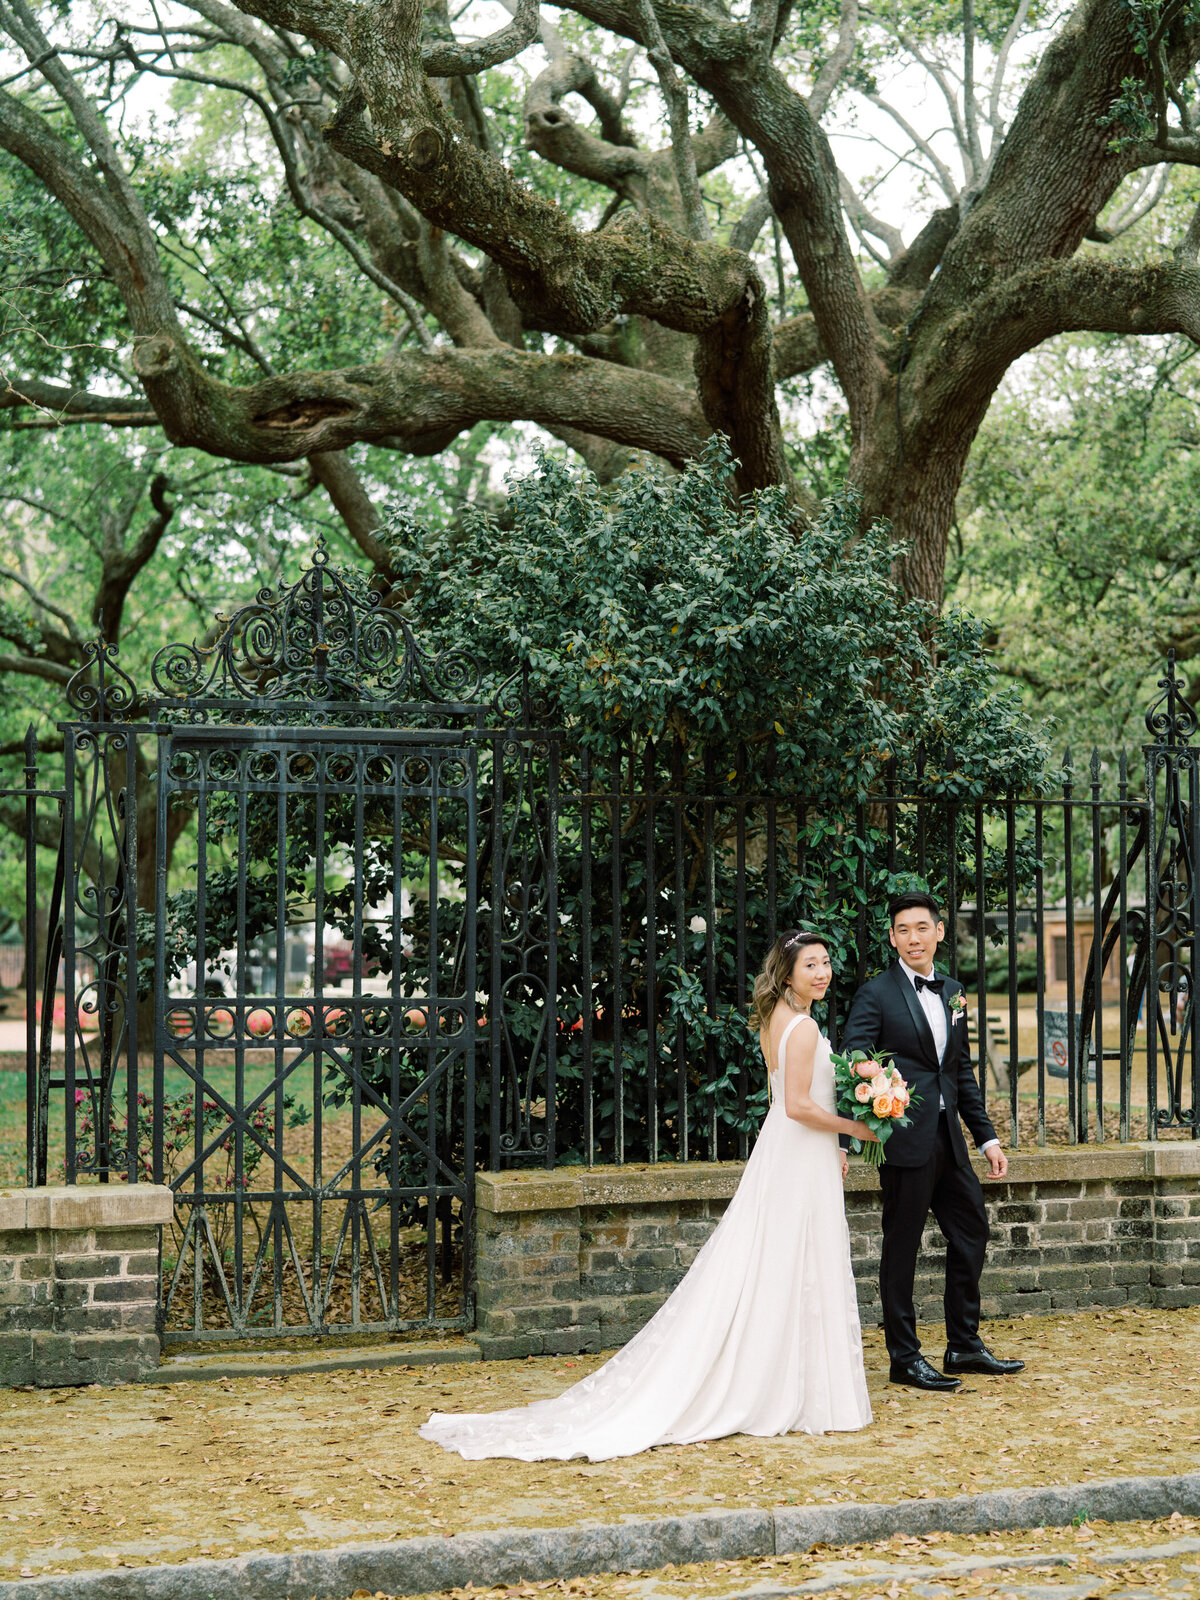 Cannon-Green-Wedding-in-charleston-photo-by-philip-casey-photography-048